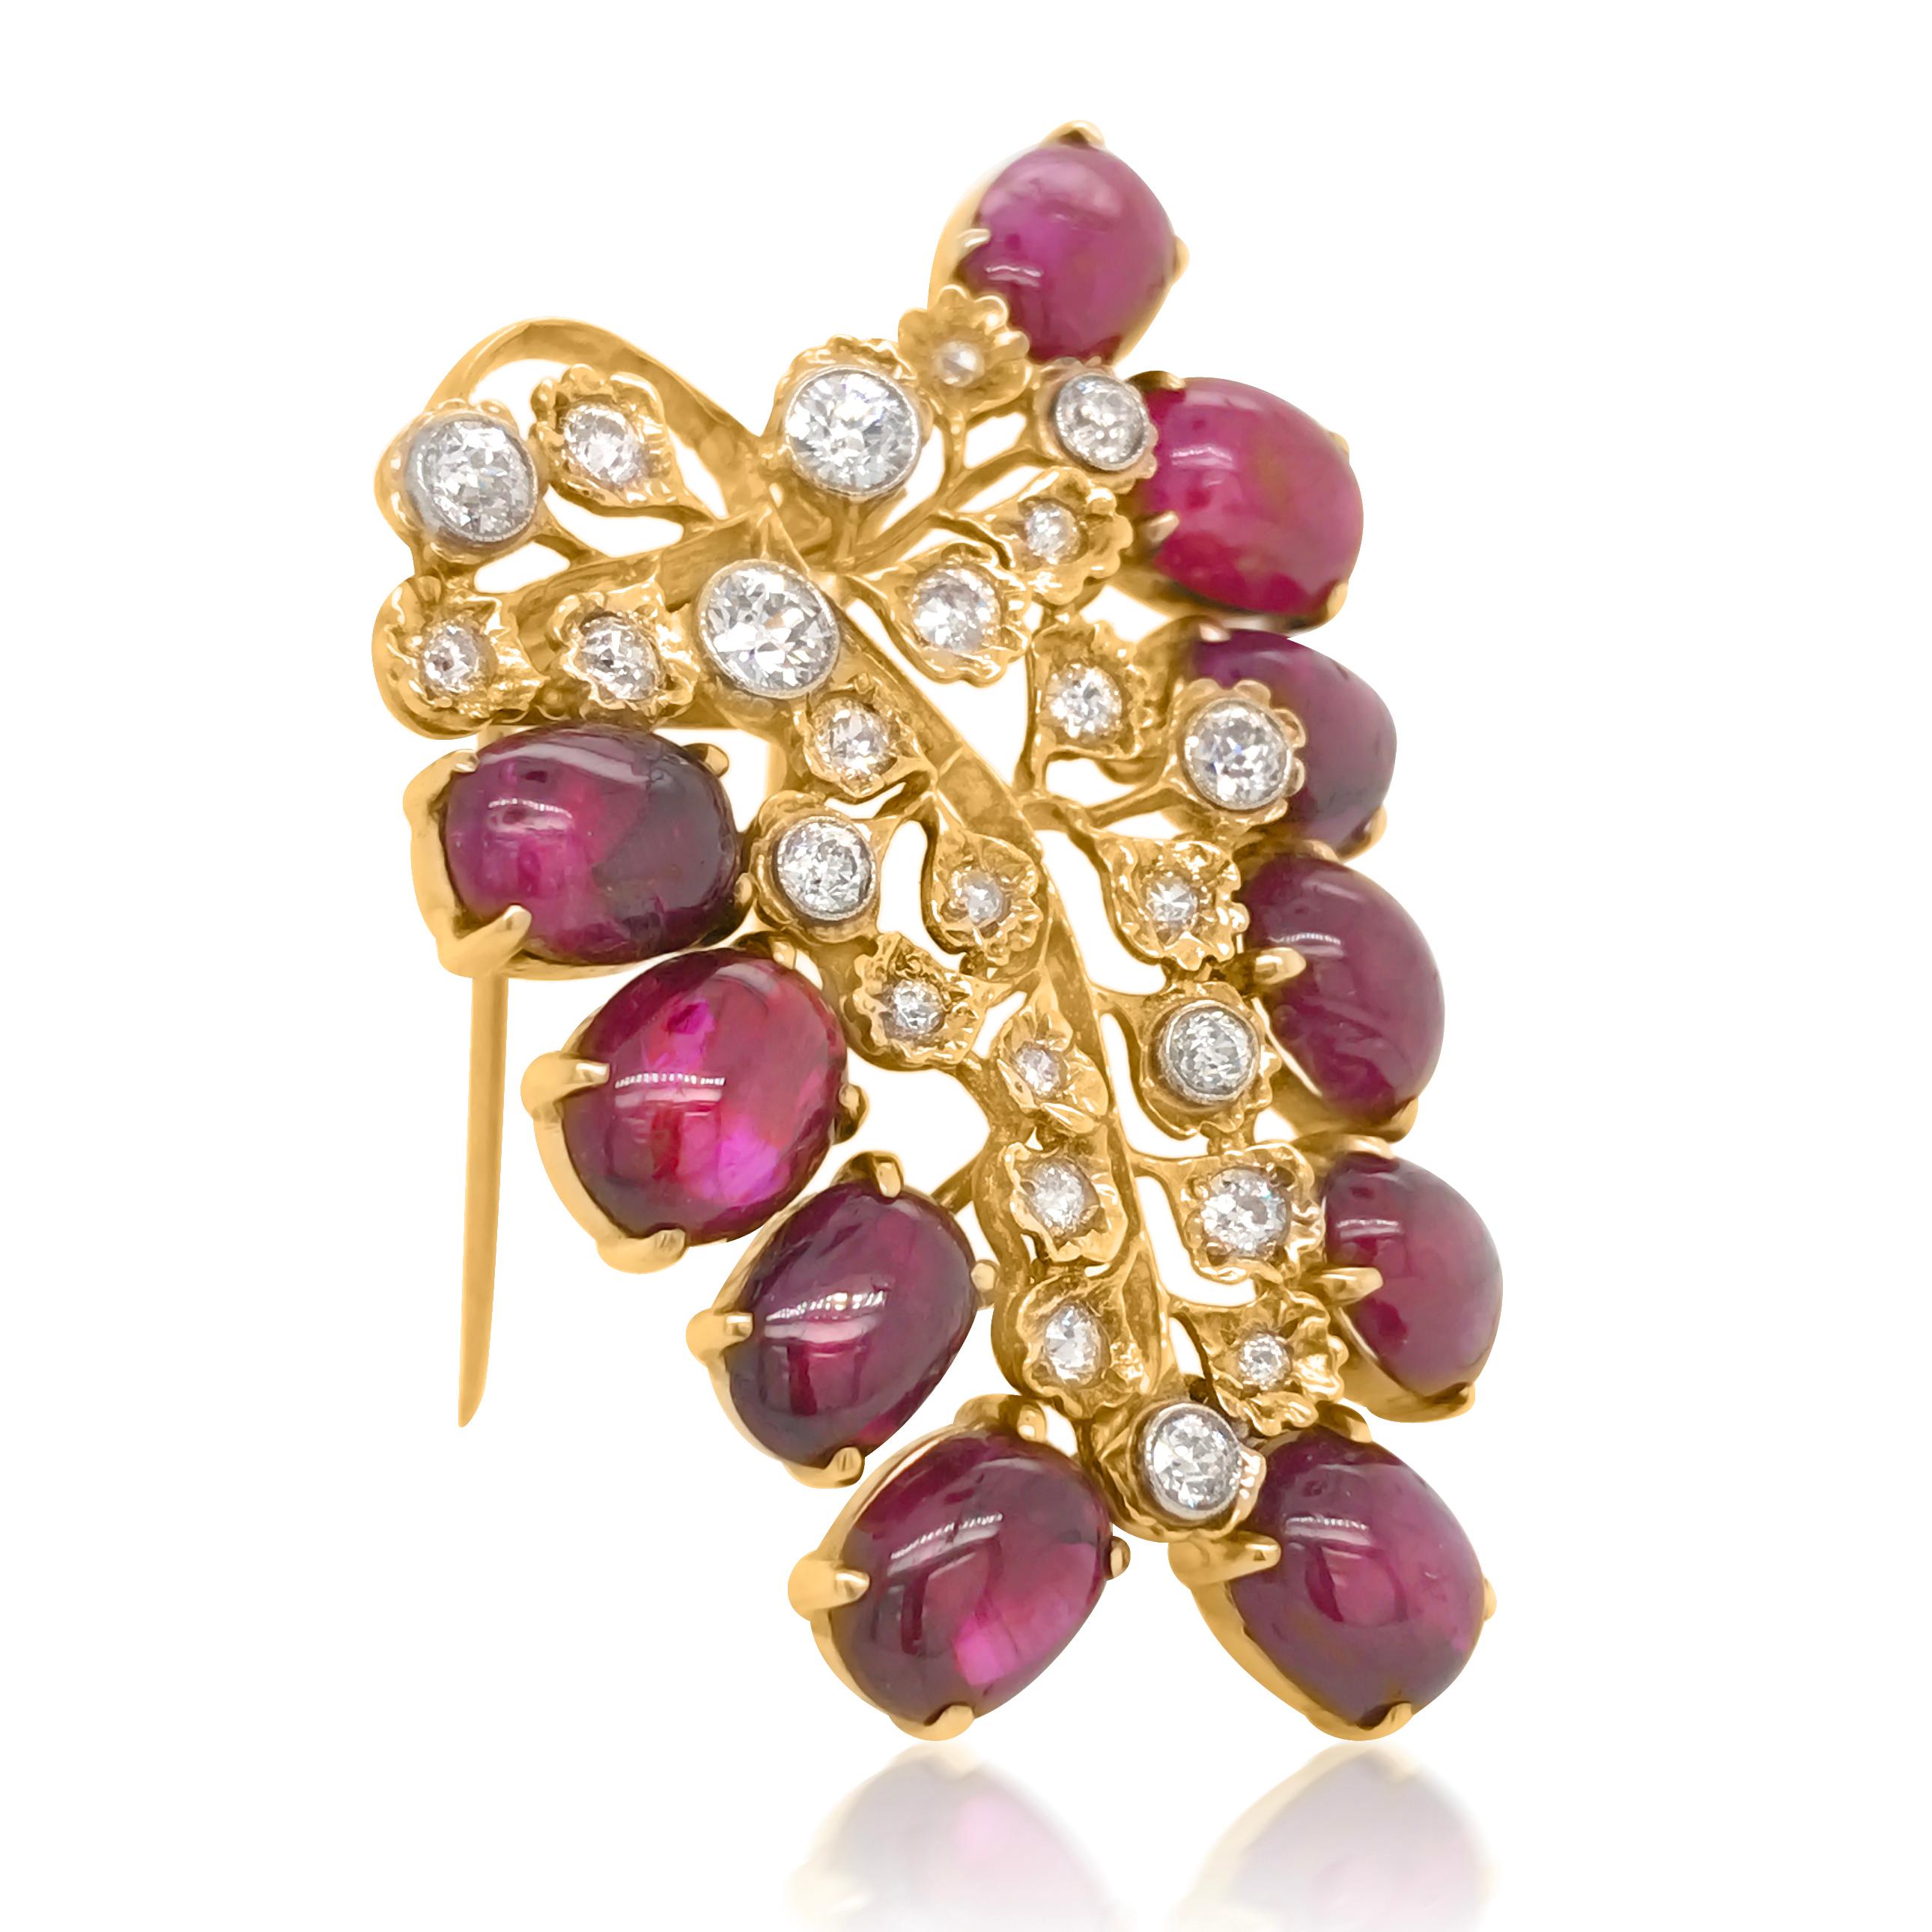 This impressive grape motif vintage brooch pin is adorned with 10 cabochon rubies approx: 25.6 carats total, enhanced with diamonds weighing approx. 18ct. This fabulous vintage ruby diamond brooch weighs 21.85 grams, measures 5.2*3.7cm. 

Ruby total